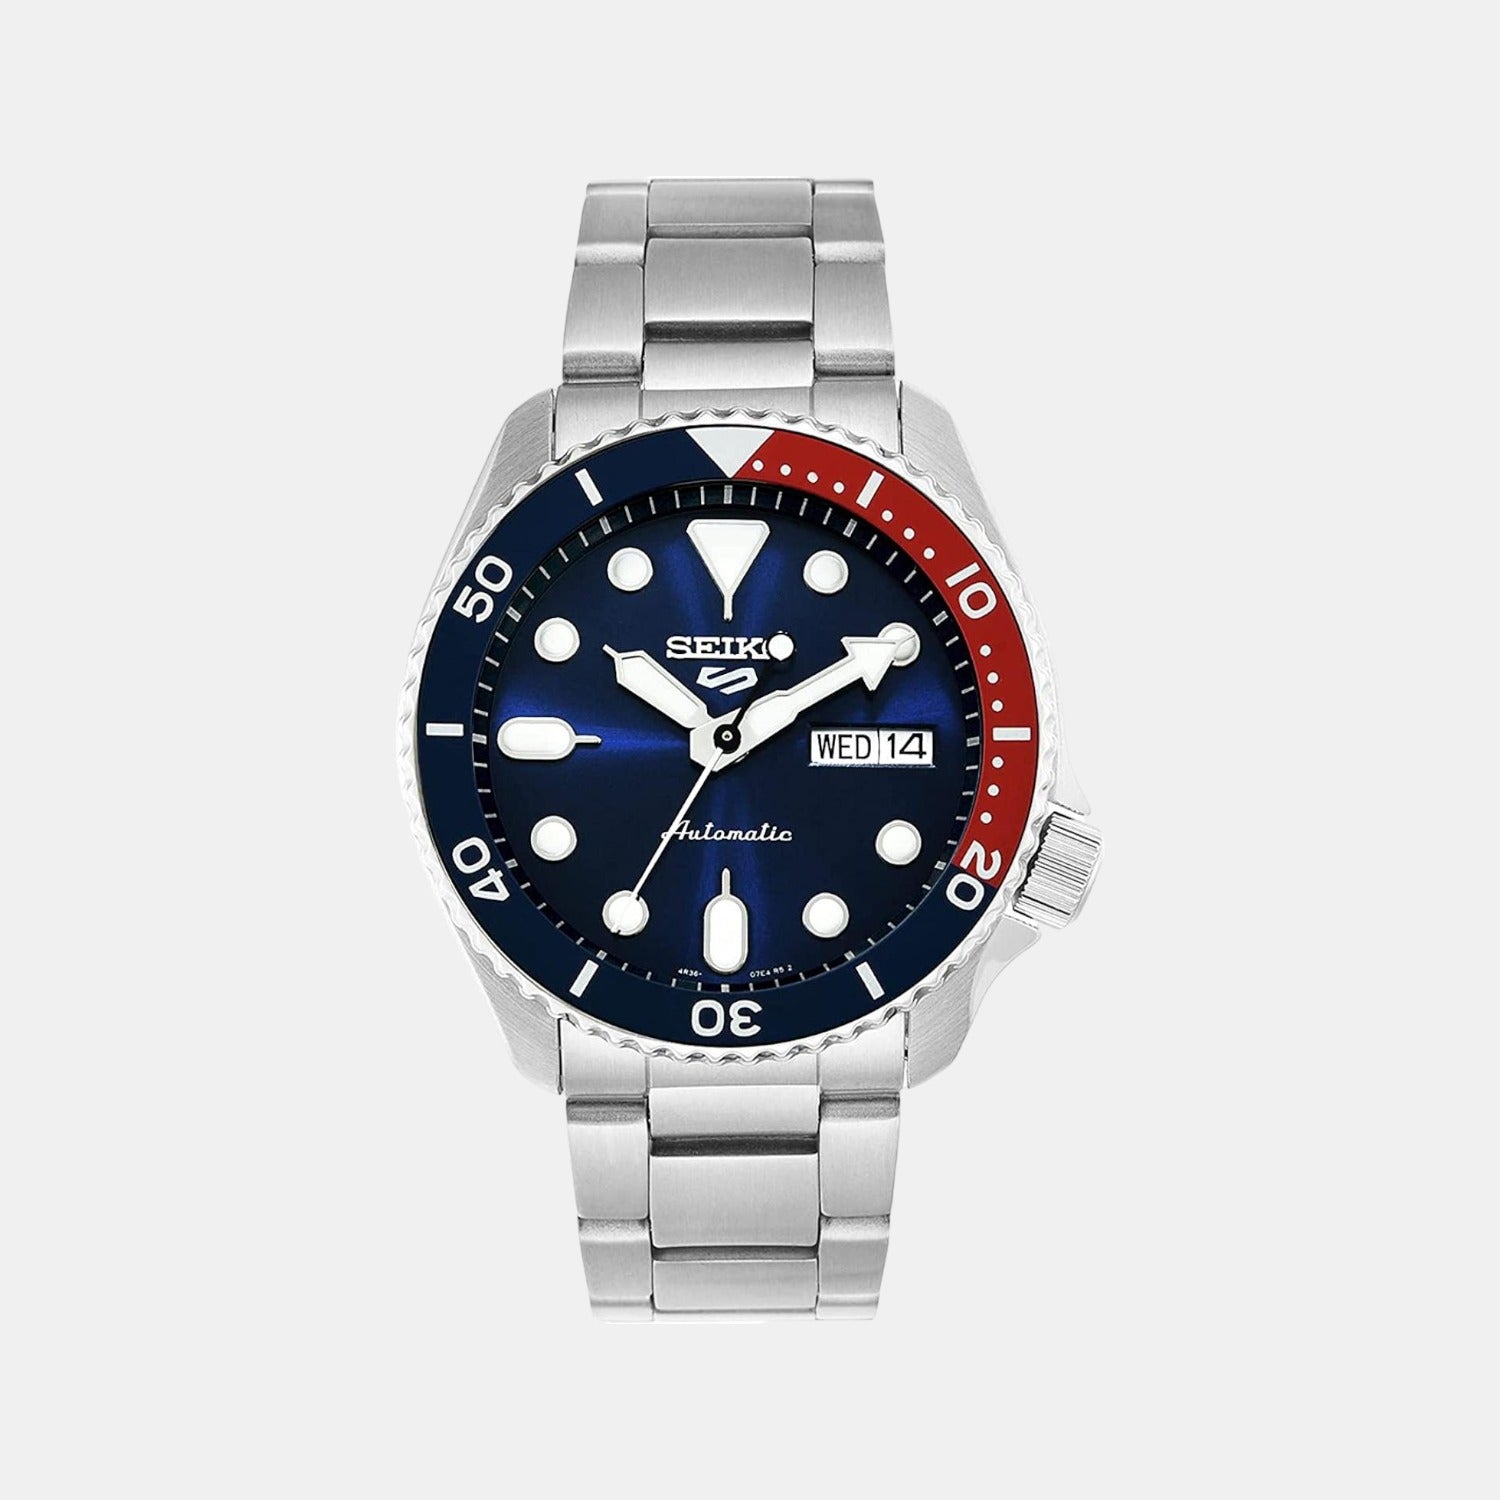 Male Blue Analog Stainless Steel Automatic Watch SRPD53K1